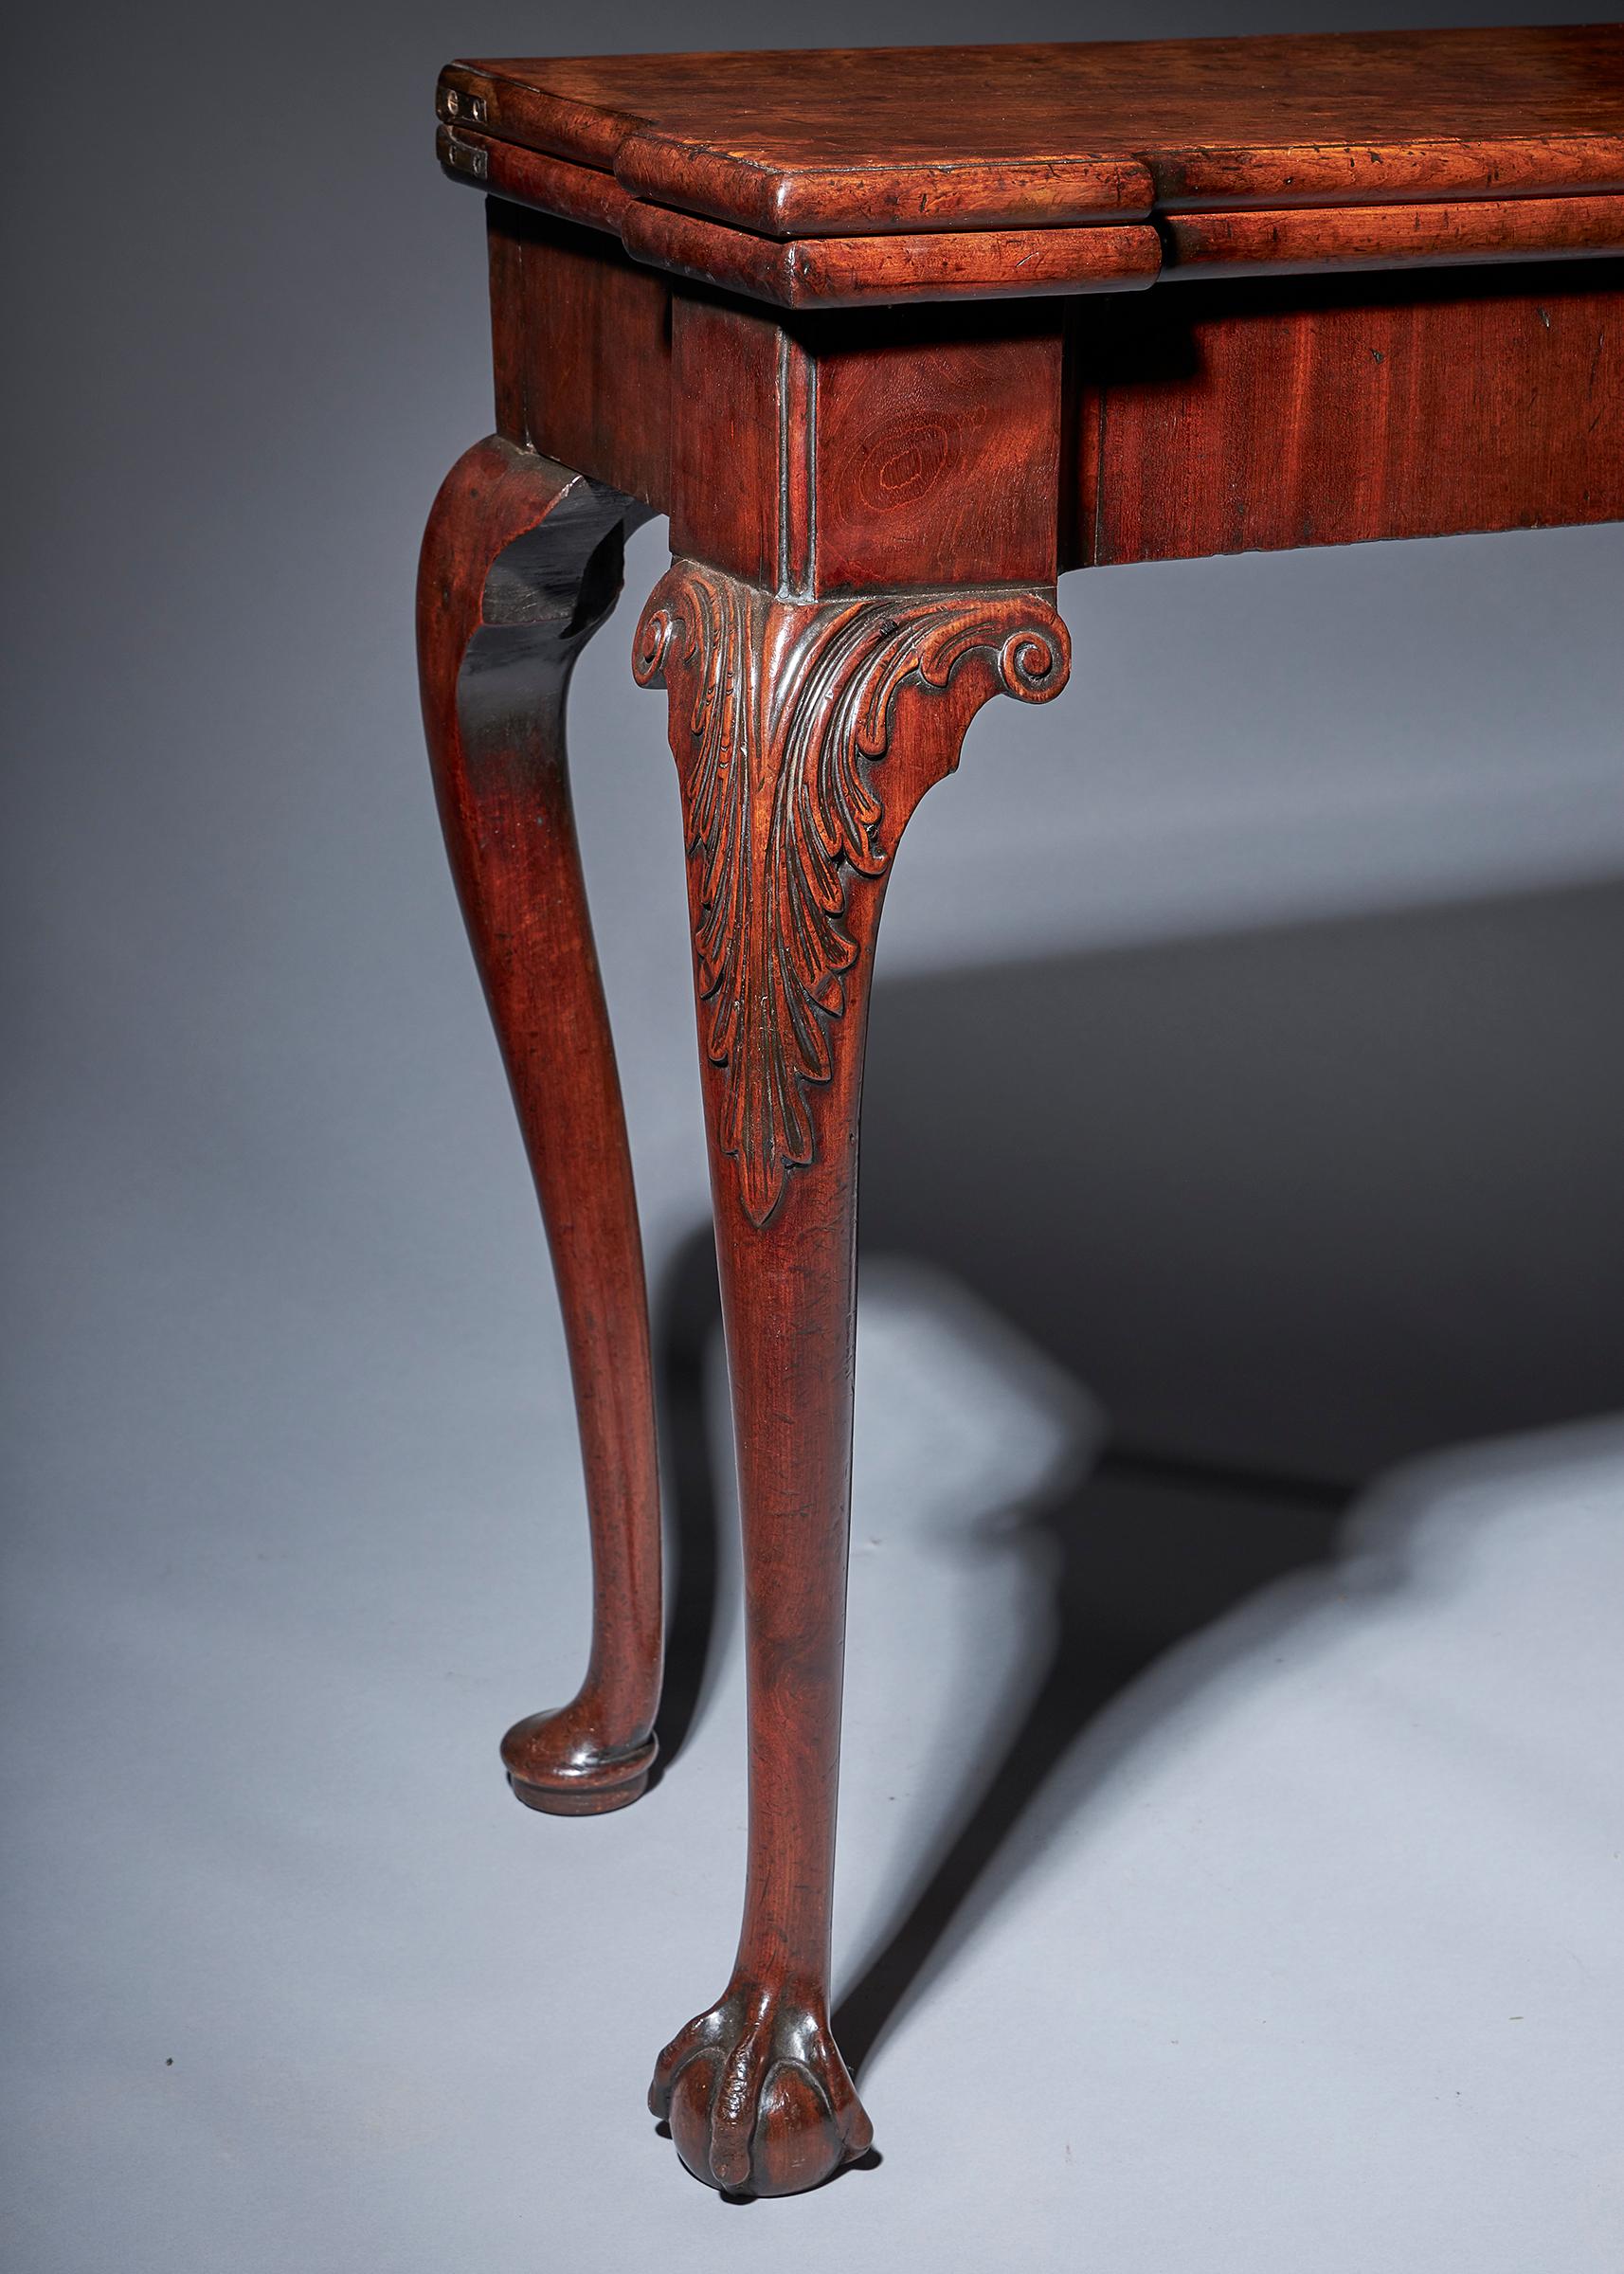 An exceptionally well proportioned (29”) Chippendale period mid-18th century Irish carved mahogany console card table. 


Card tables from the period of this small size (29”) and form, tend to be more desirable as the proportions are more